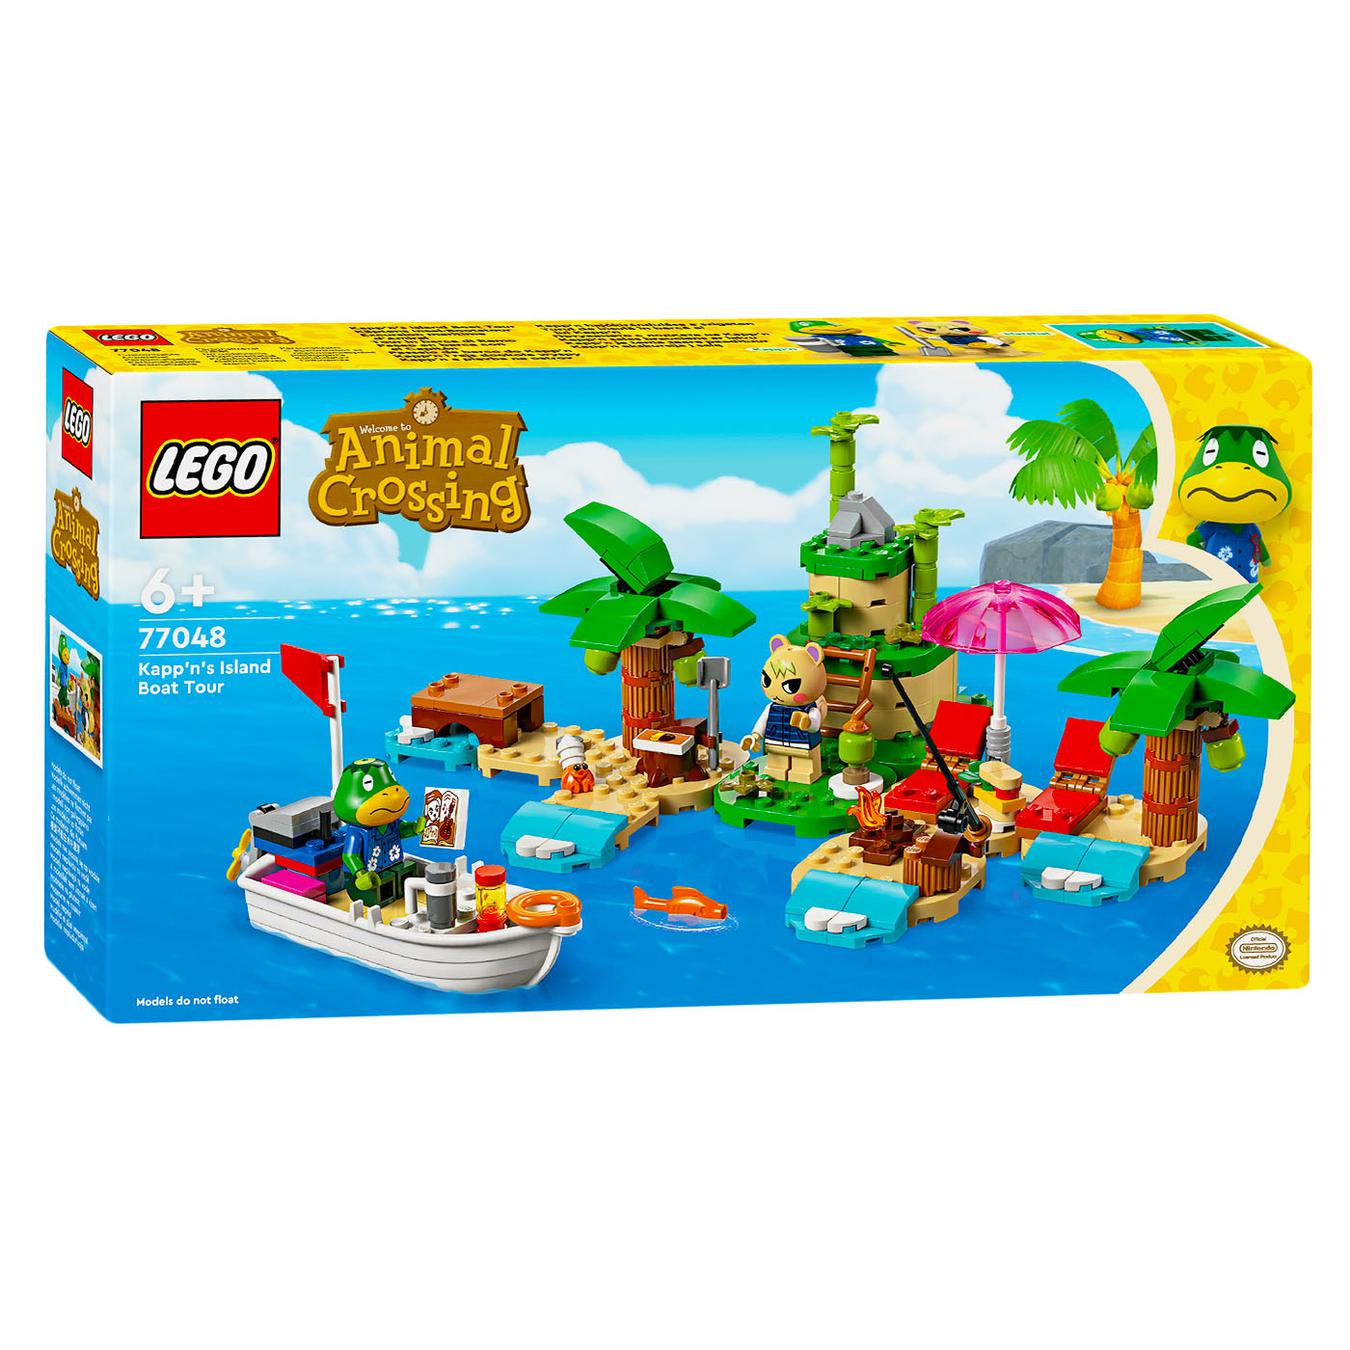 Constructor LEGO 77048 Island excursion by boat